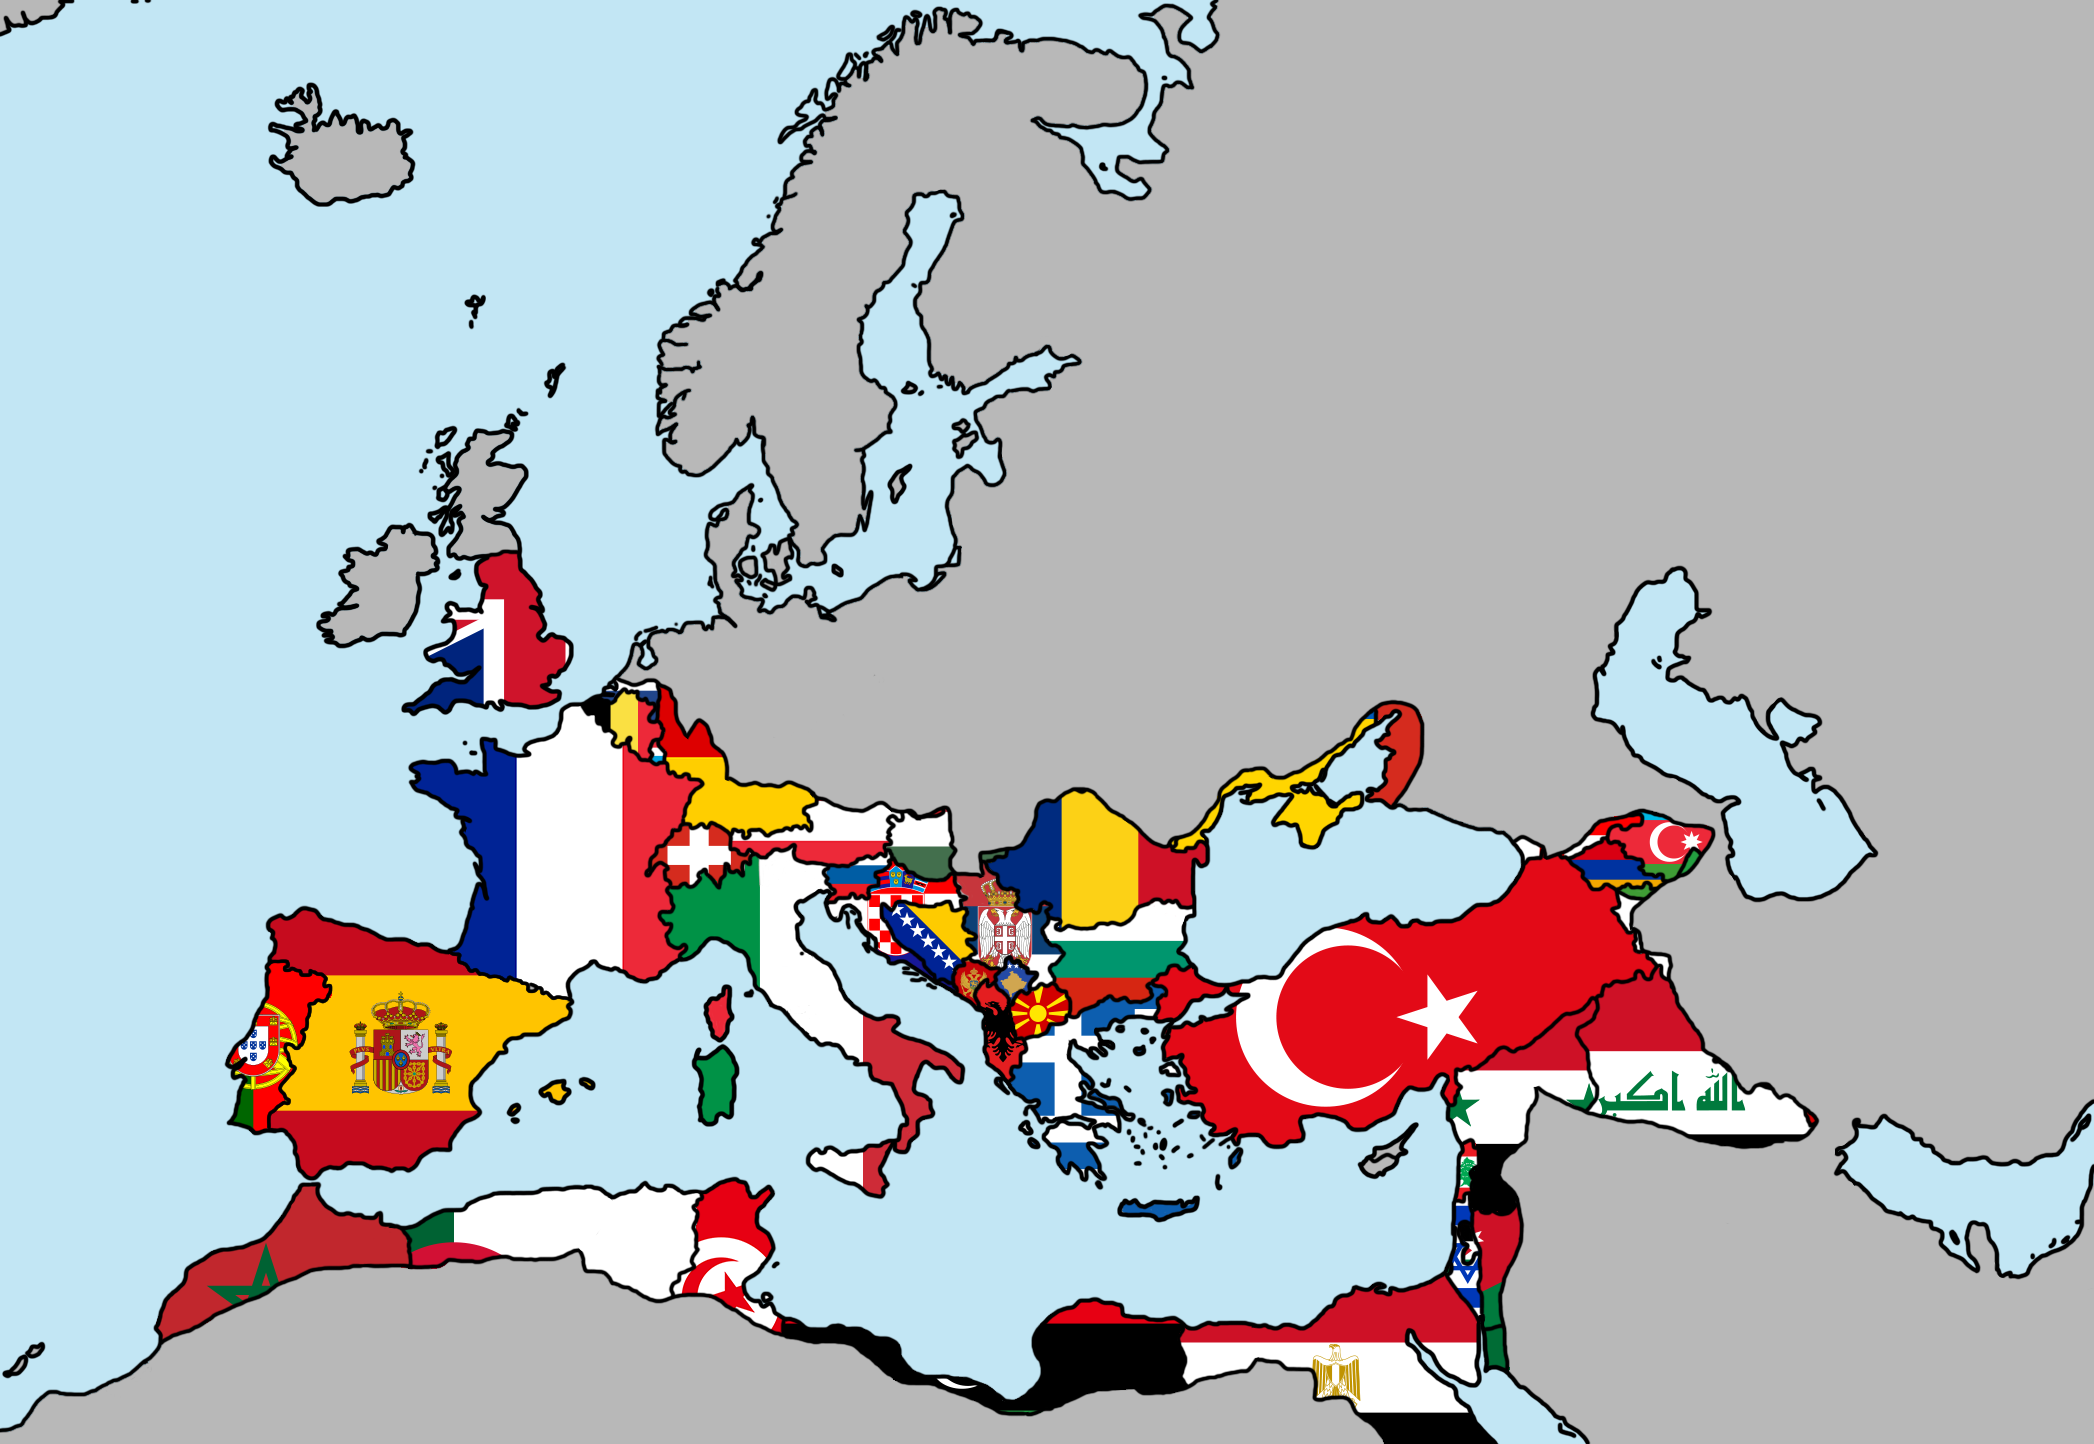 Map Of The Roman Empire With Modern Overlay By Universallyidiotic On